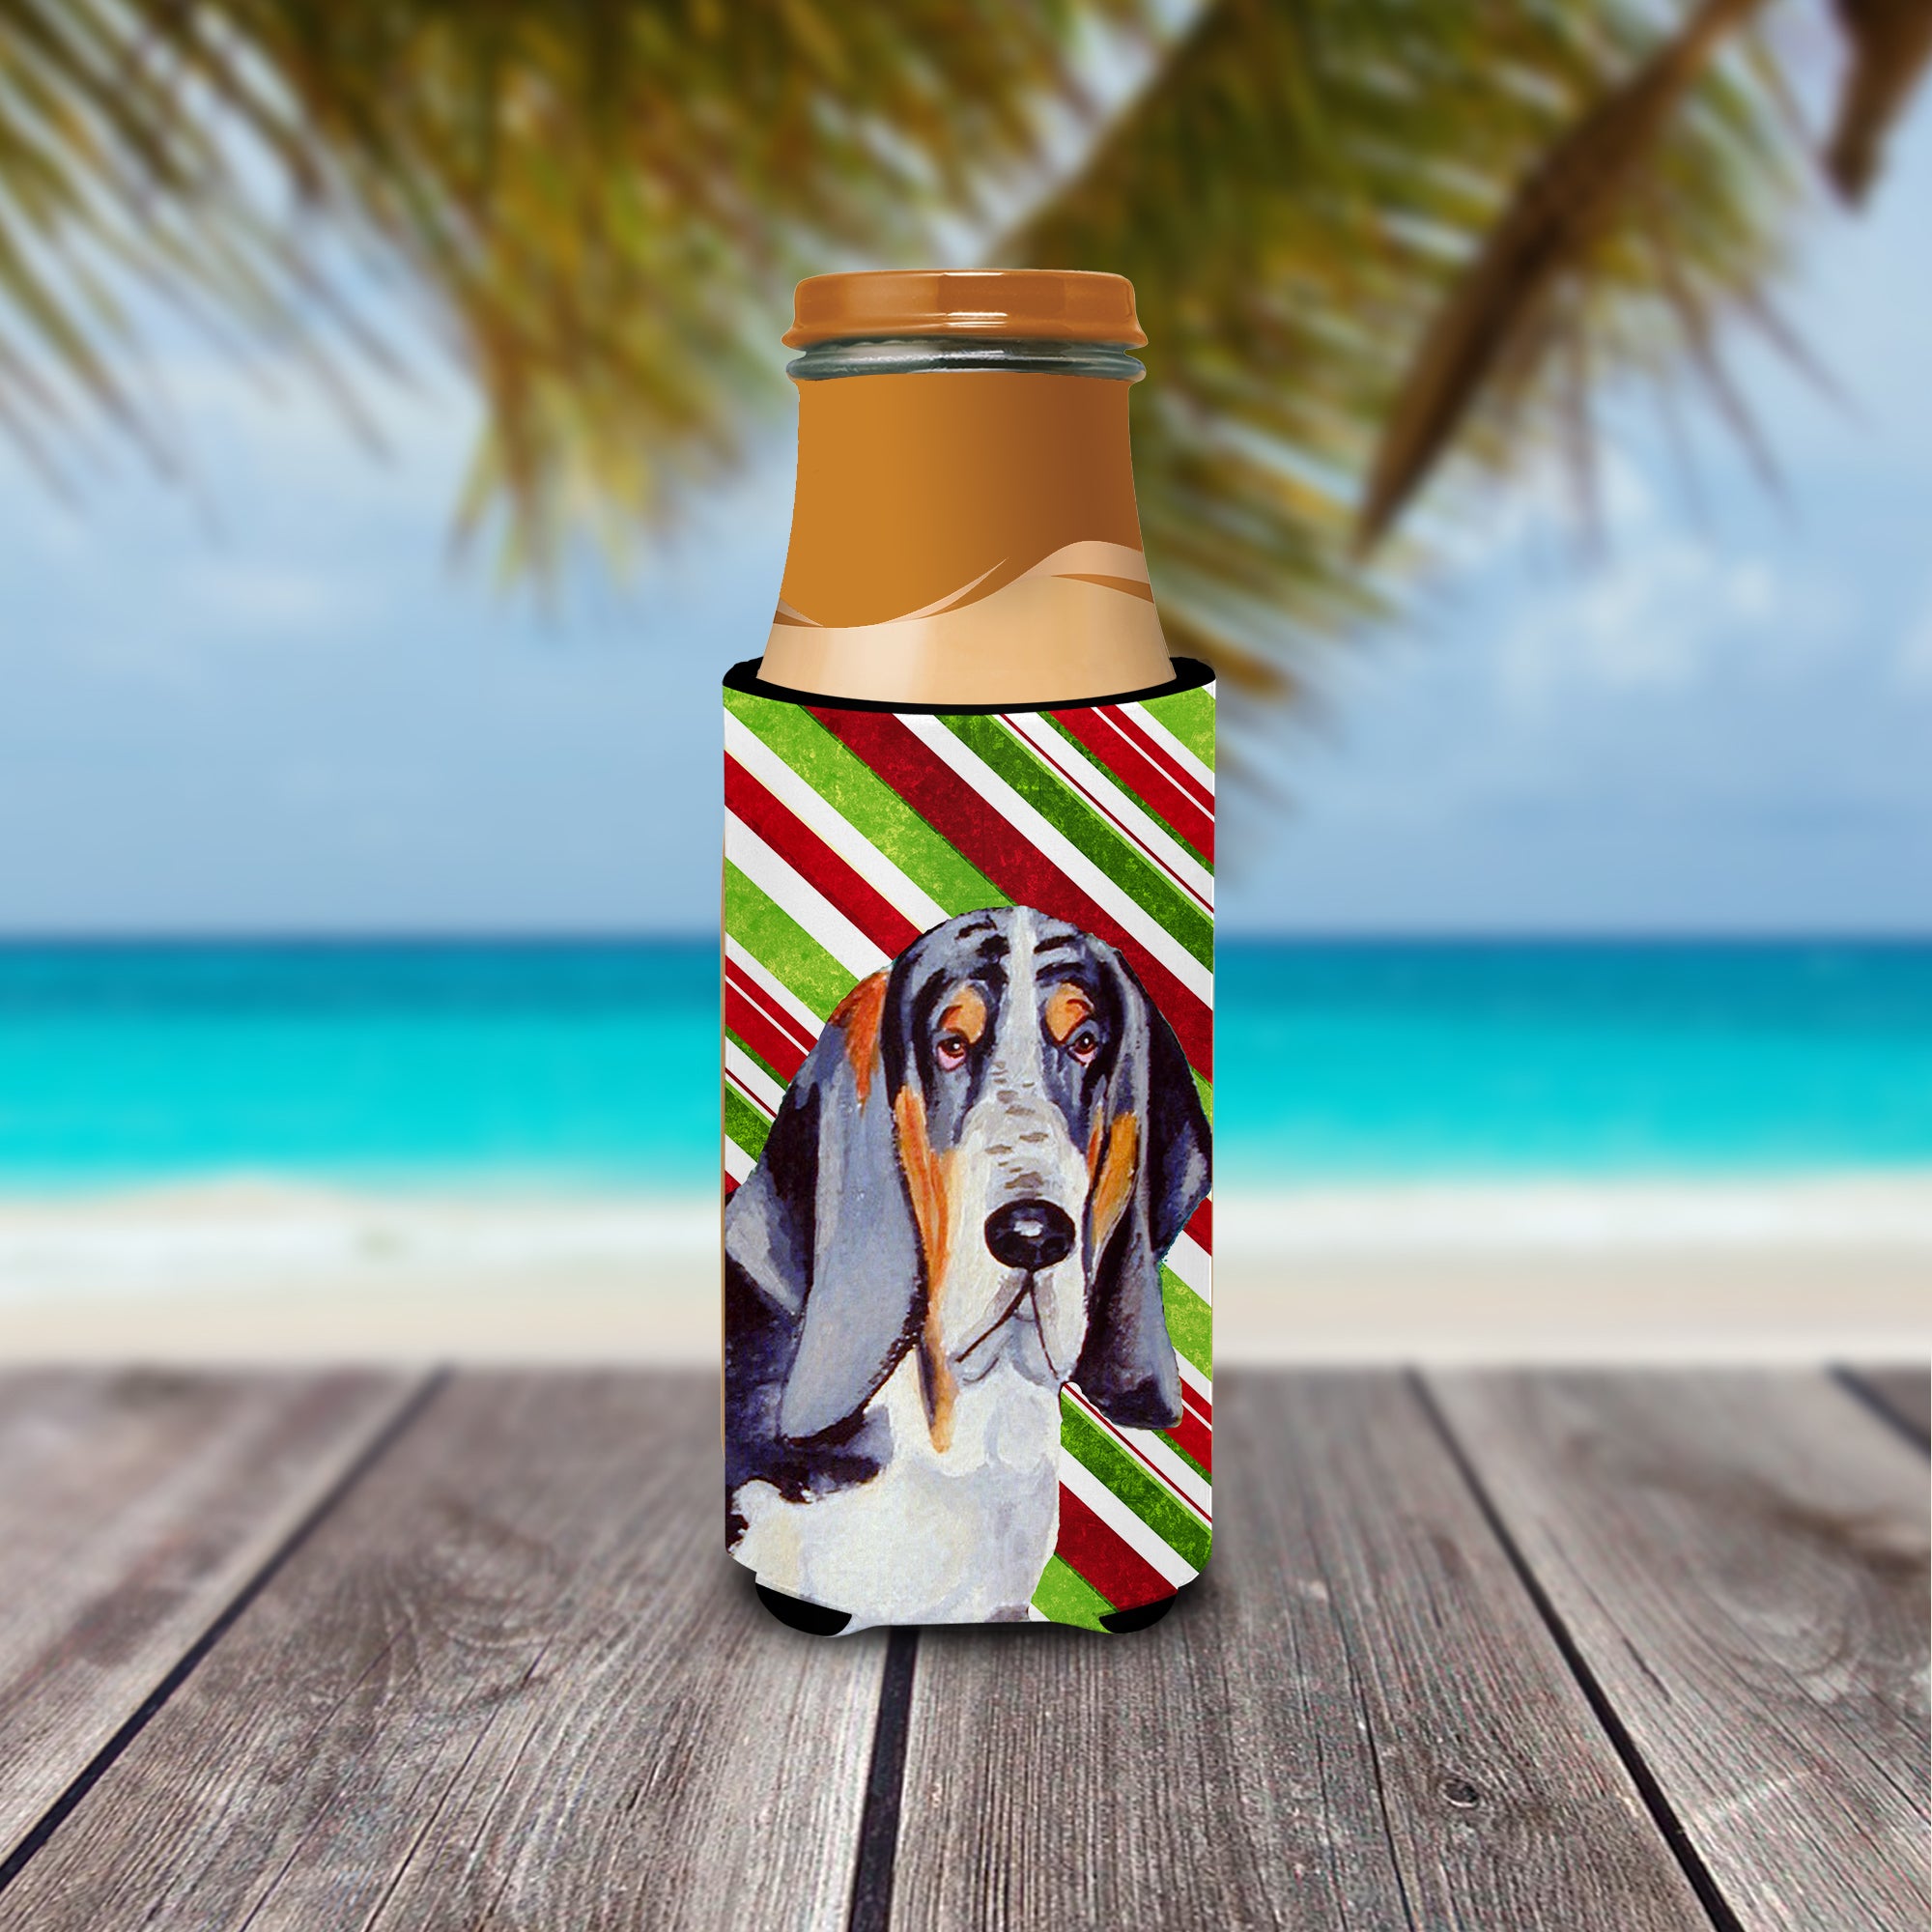 Basset Hound Candy Cane Holiday Christmas Ultra Beverage Isolateurs pour canettes minces LH9237MUK